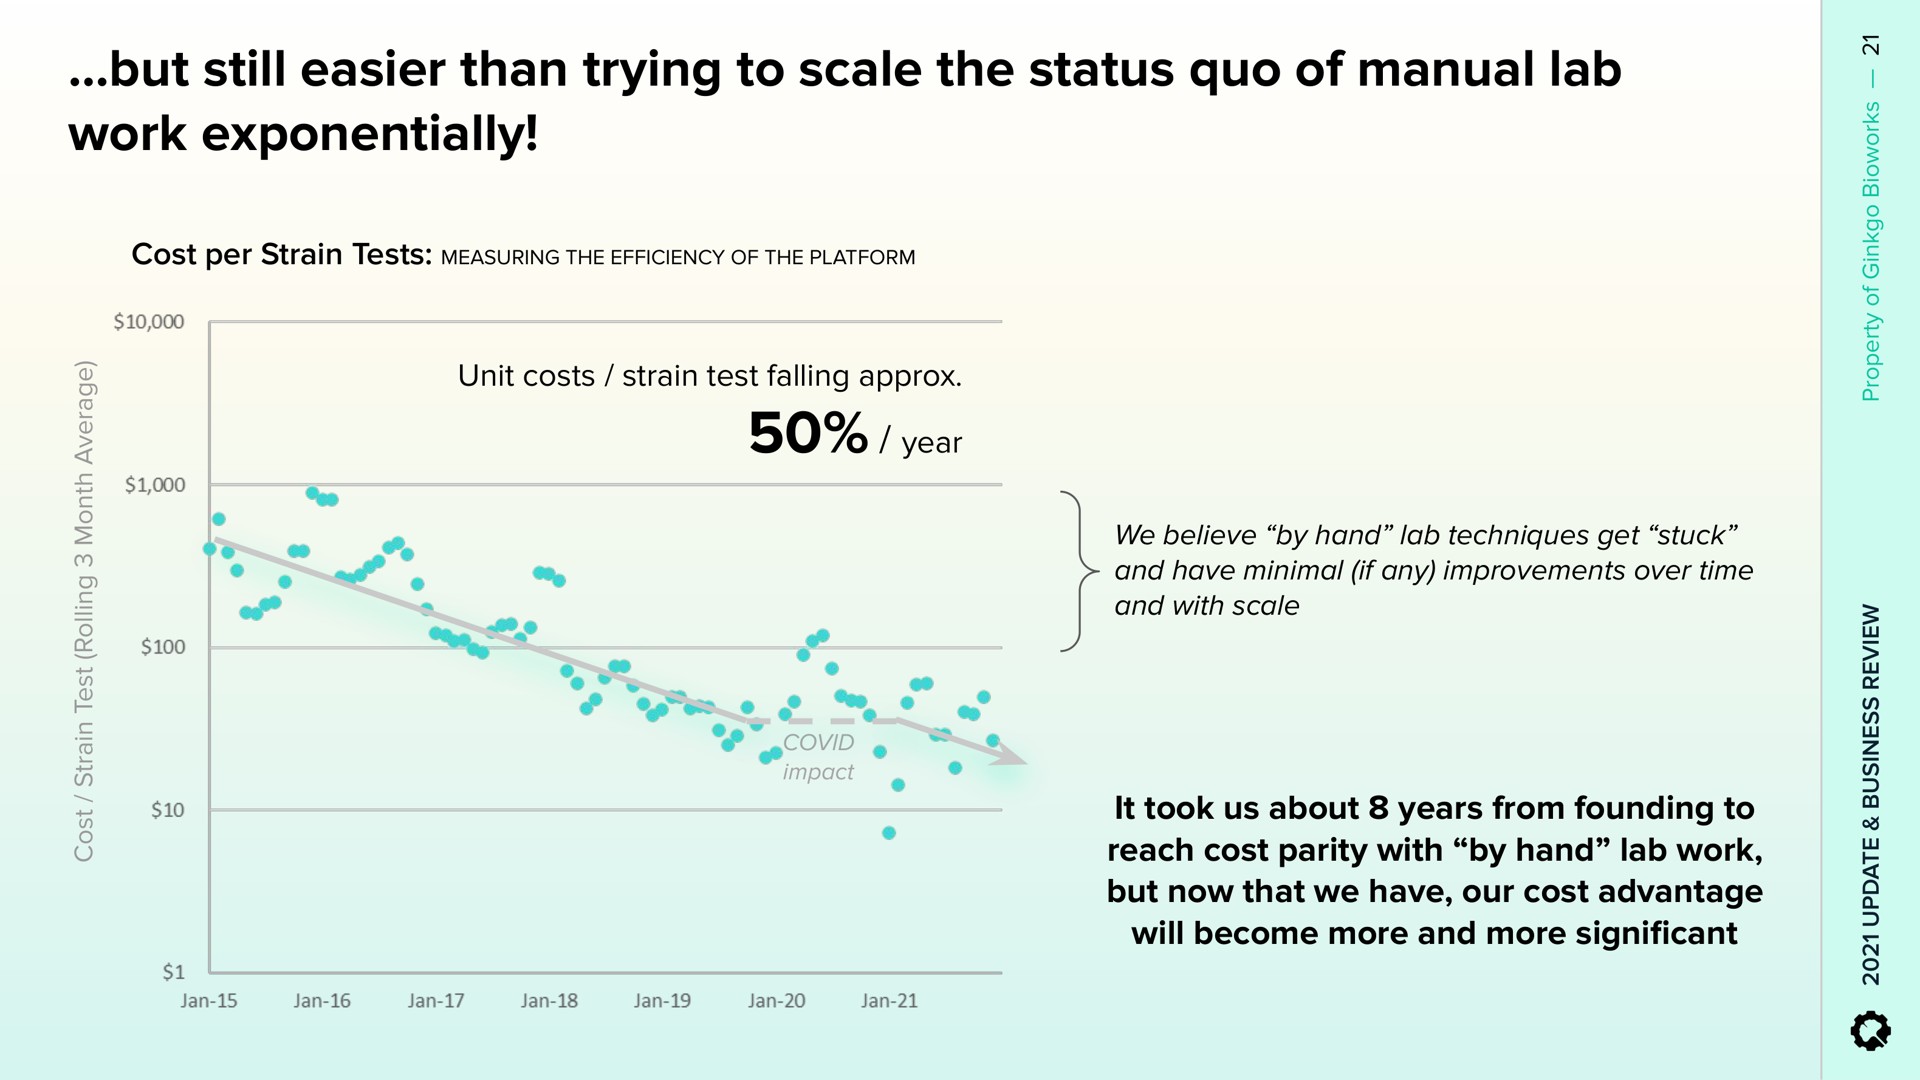 but still easier than trying to scale the status quo of manual lab work exponentially | Ginkgo